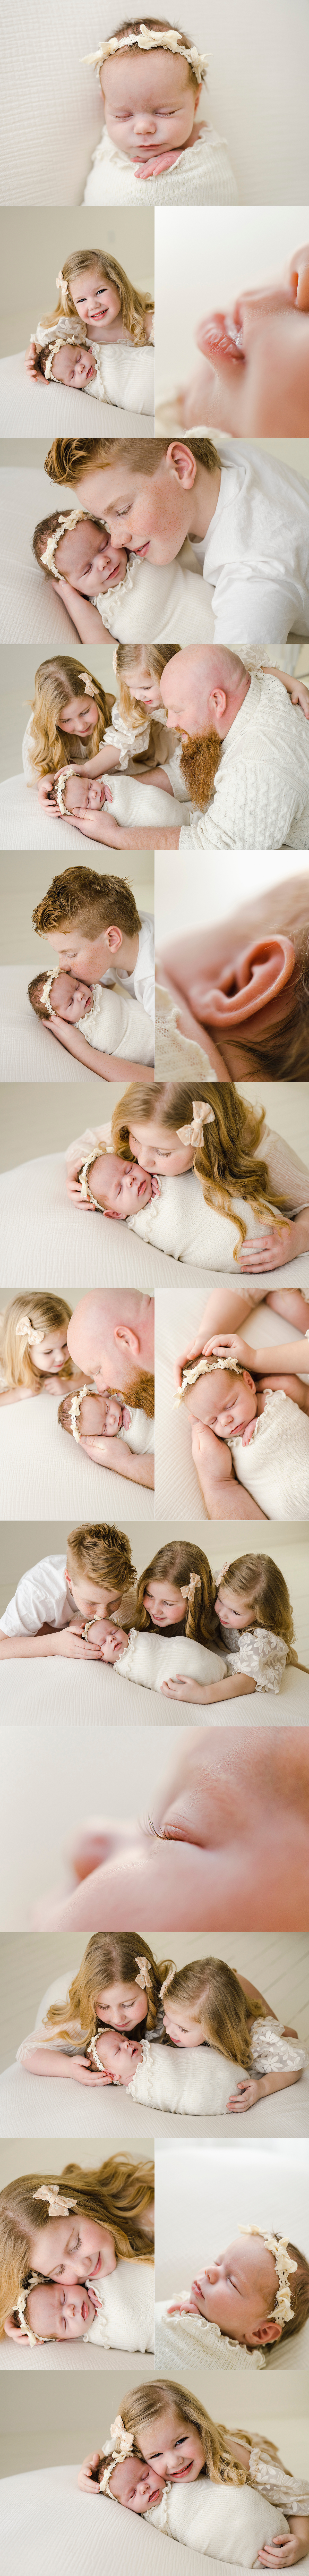 newborn baby session in studio with three older siblings